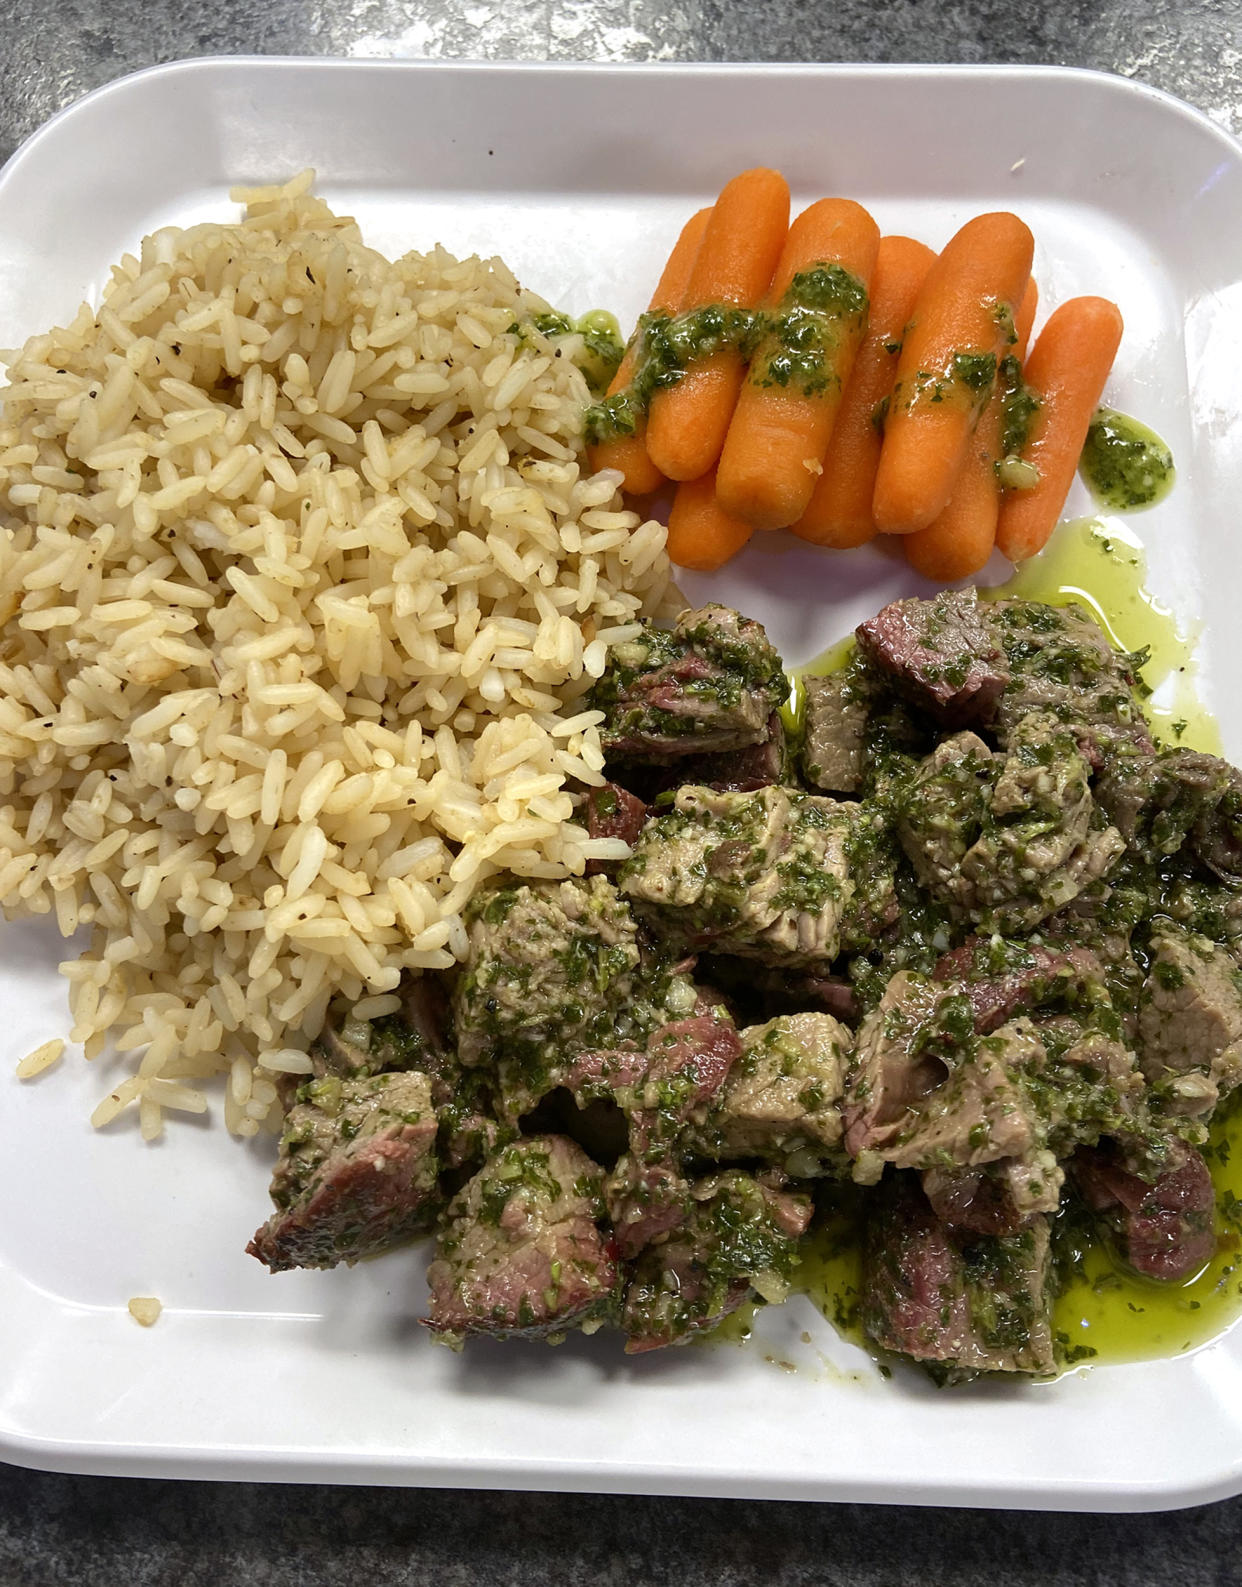 One of Veldeer's menu items: flank steak with chimichurri, baby carrots and rice. (St. Paul the Apostle School)